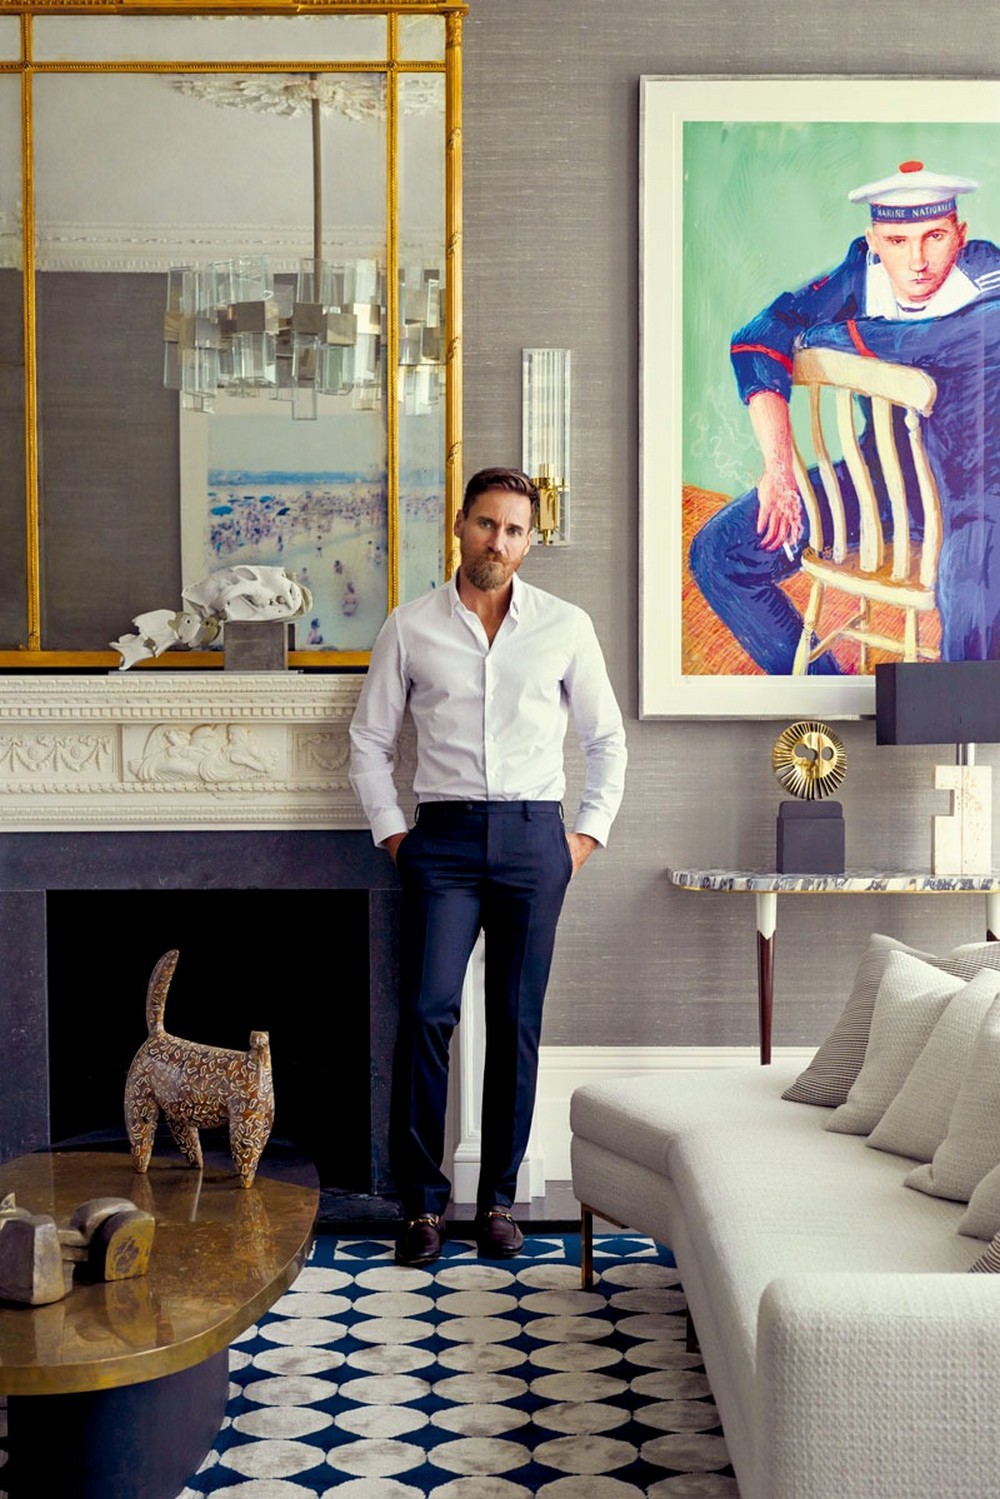 Top 100 Best Worldwide Interior Designers By CovetED Magazine - Part II